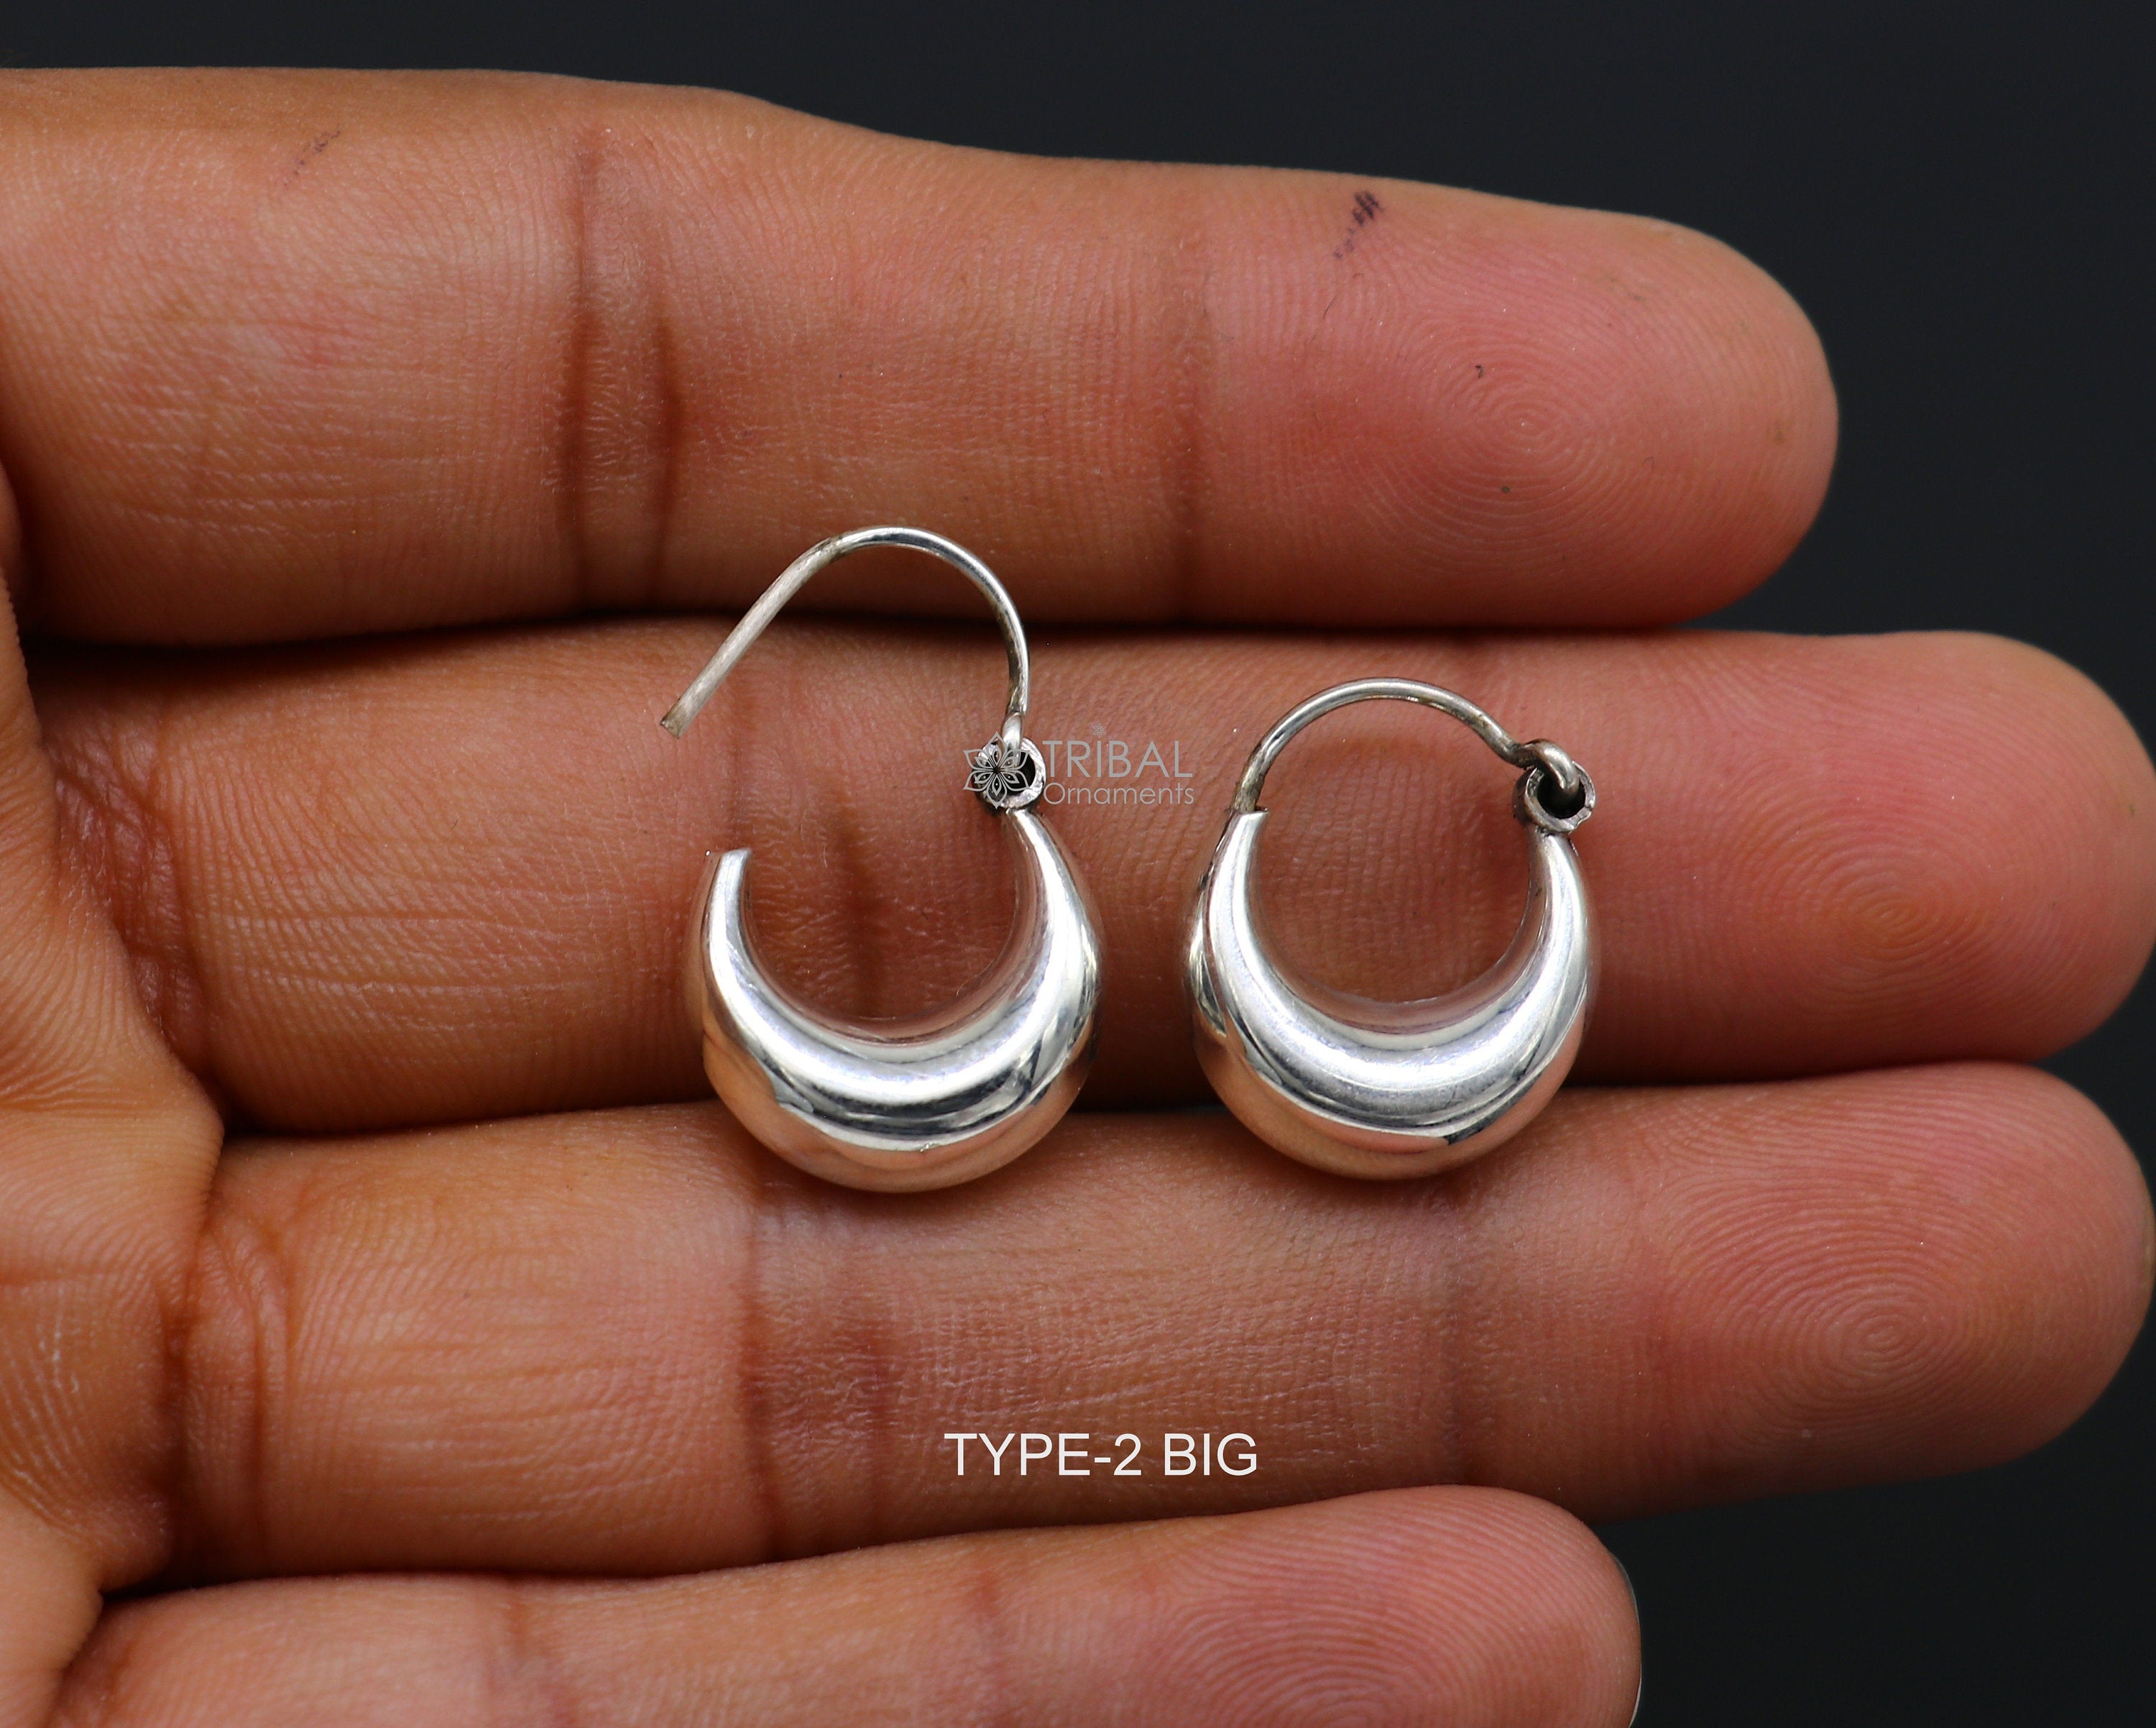 Fancy Drop Earrings In White Gold Jewelry Trendy Earring Designs For Girl  And Women Gender WomenS at Best Price in Jaipur  Valentine Jewellery  India Pvt Ltd